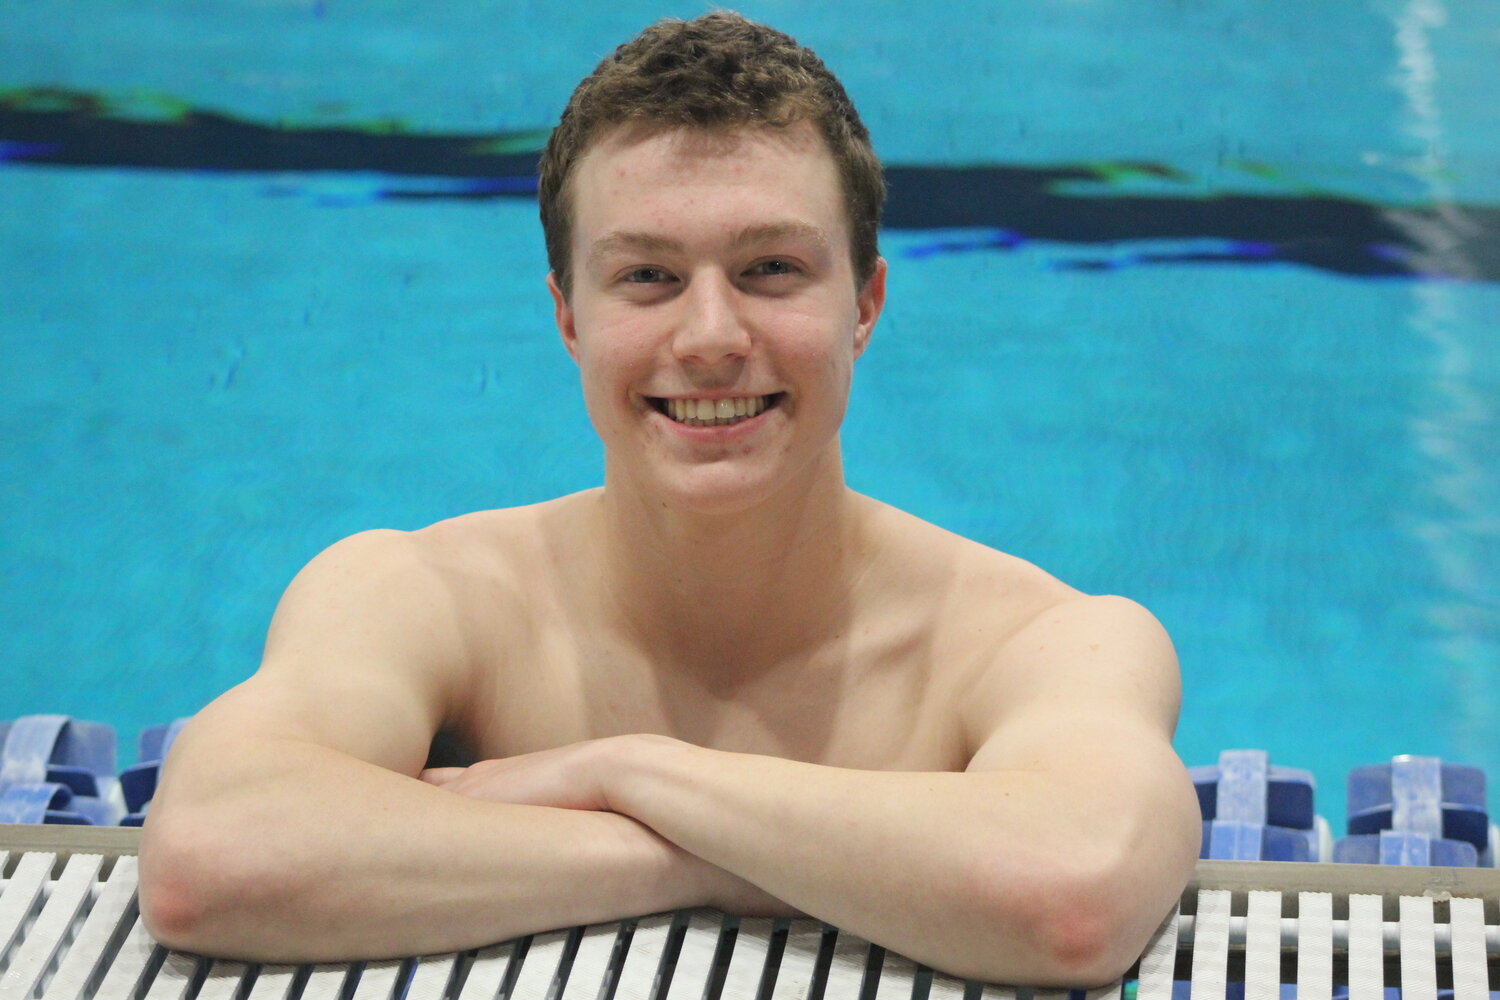 Crawfordsville senior Whitman Horton finished his career as a two-time state finalist and one of the greatest swimmers in CHS history. Horton is the 2023-24 Boys Swimmer of the Year